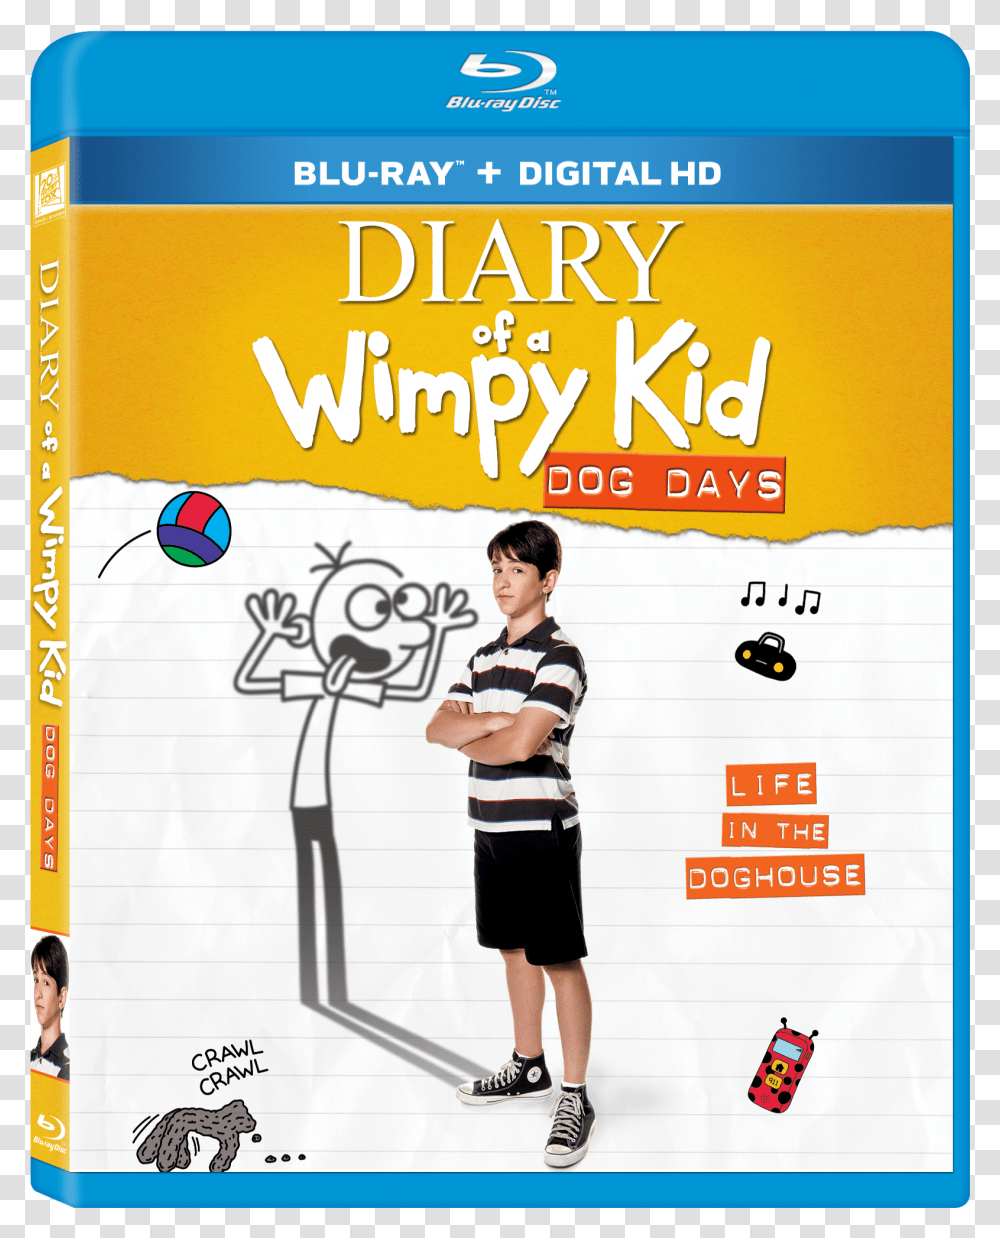 Dog Days Wimpy Kid, Person, Advertisement, Poster Transparent Png